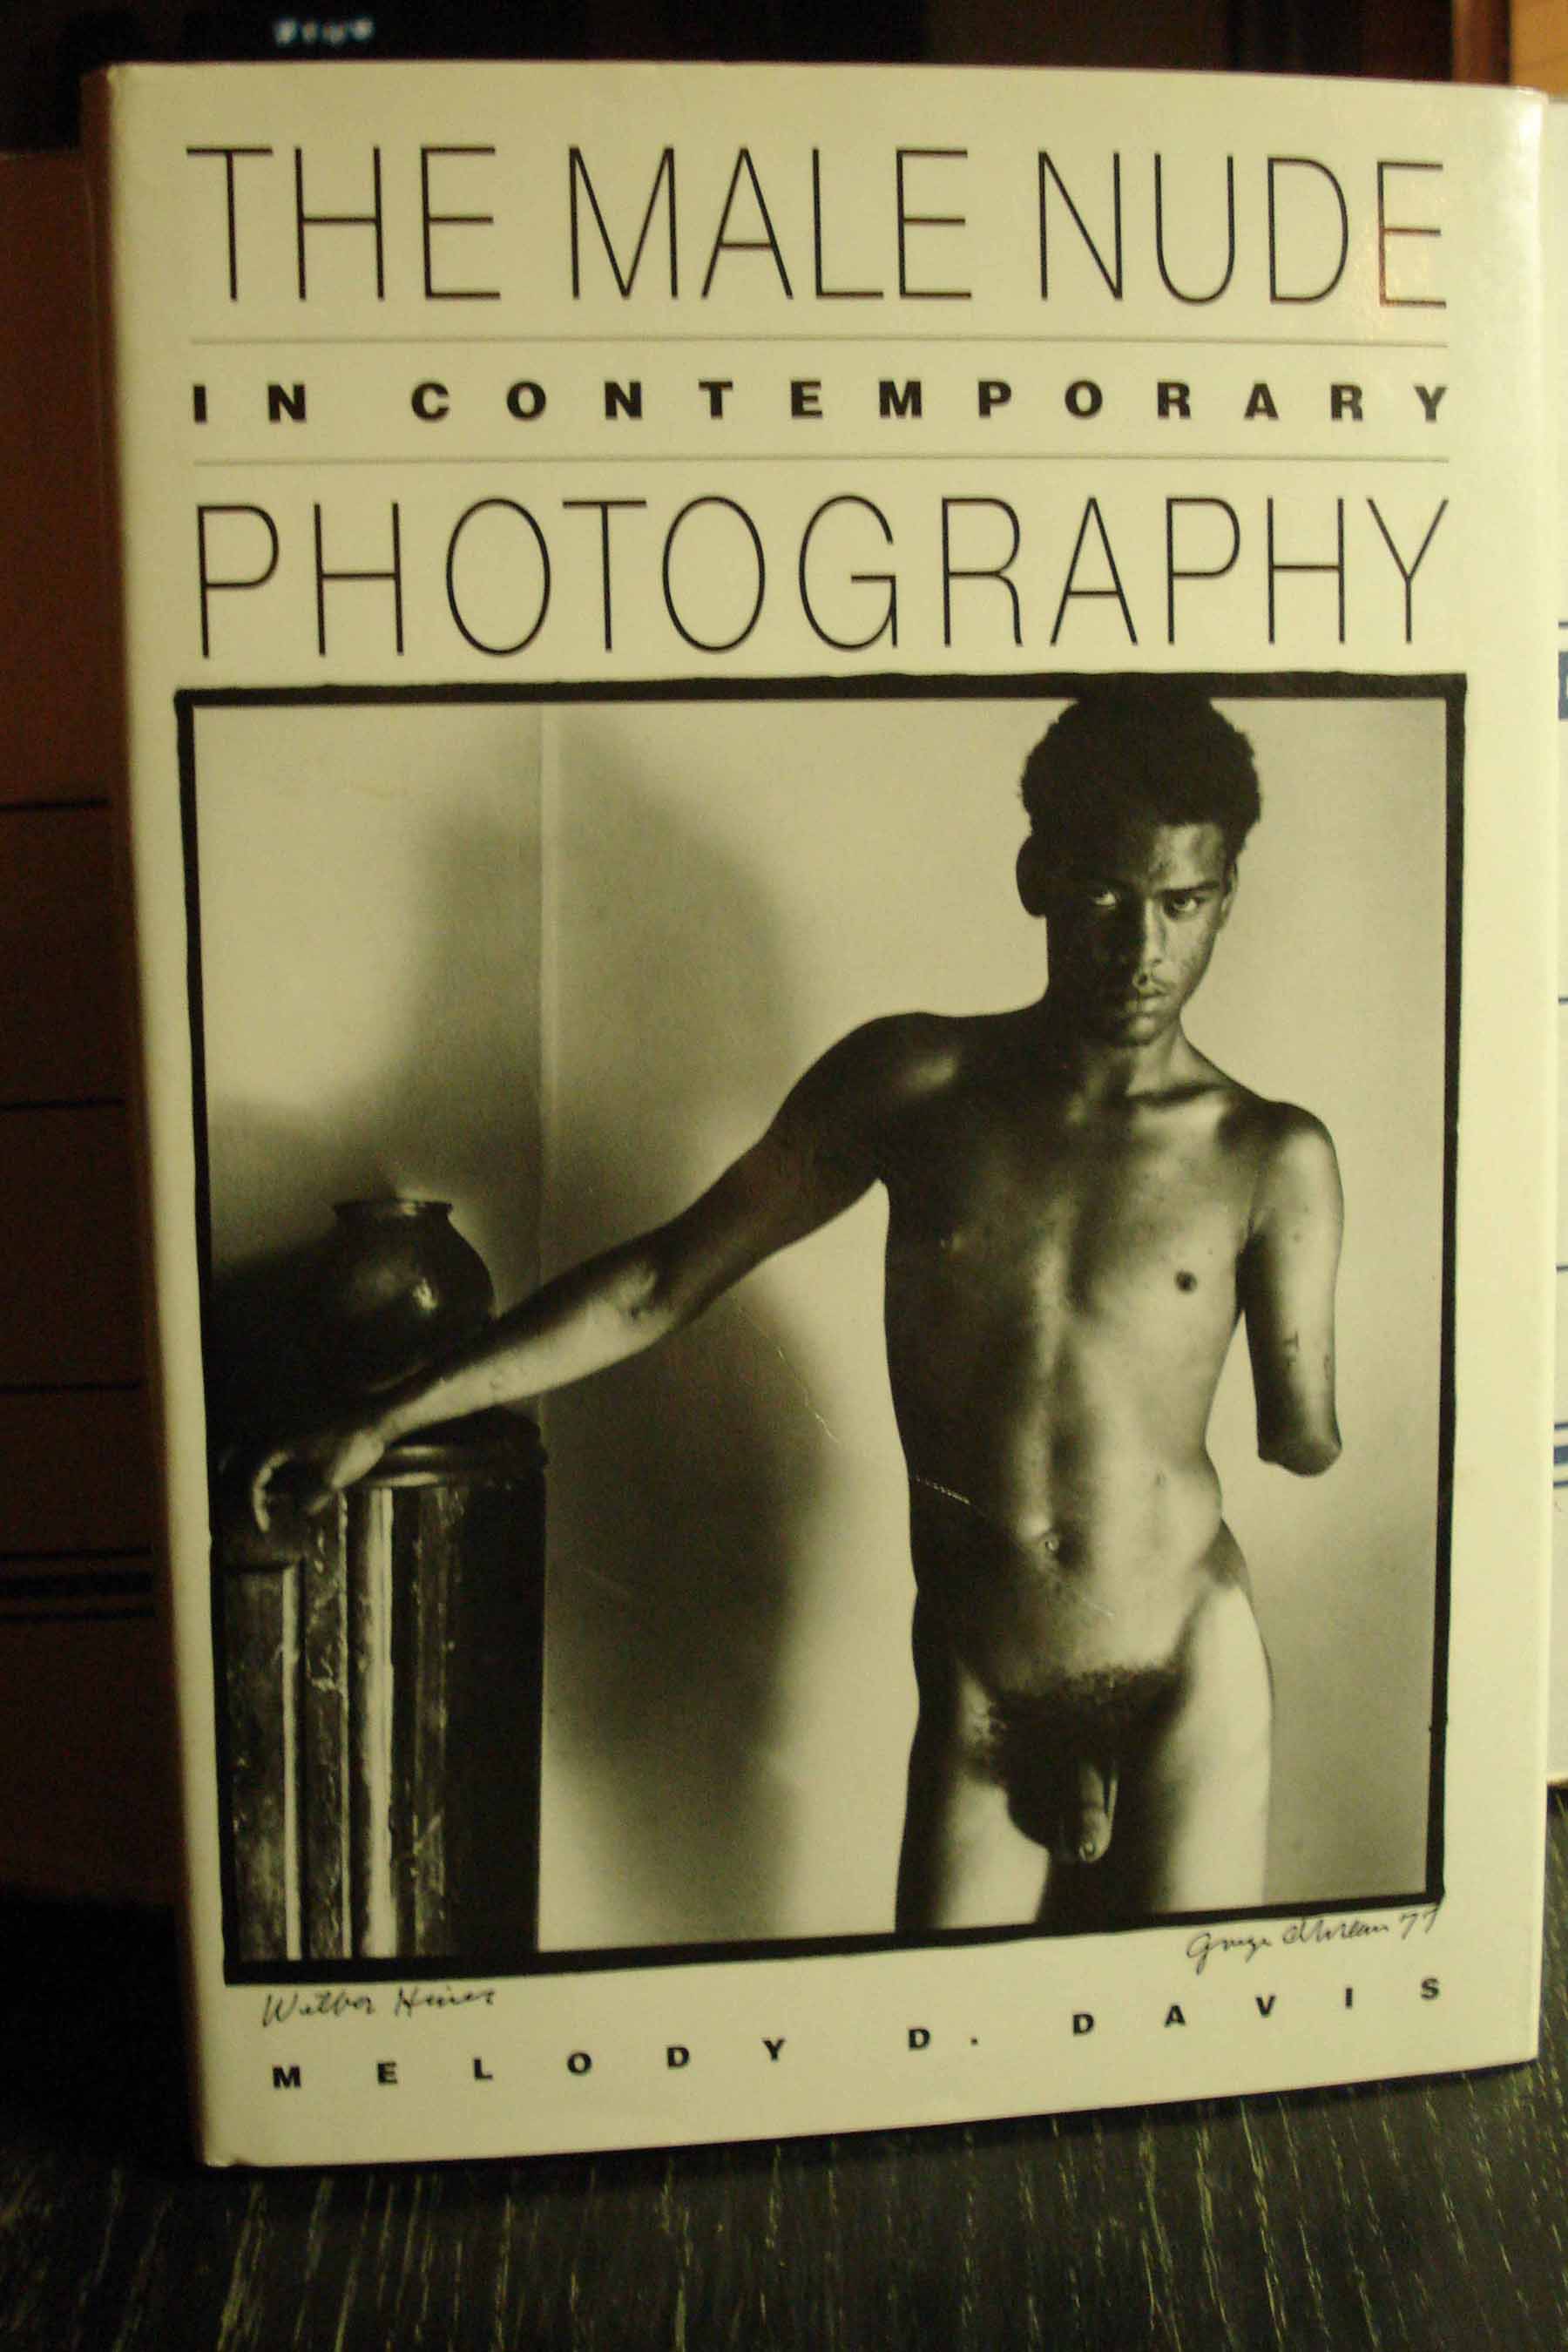 The Male Nude in Contemporary Photography - Davis, Melody D.